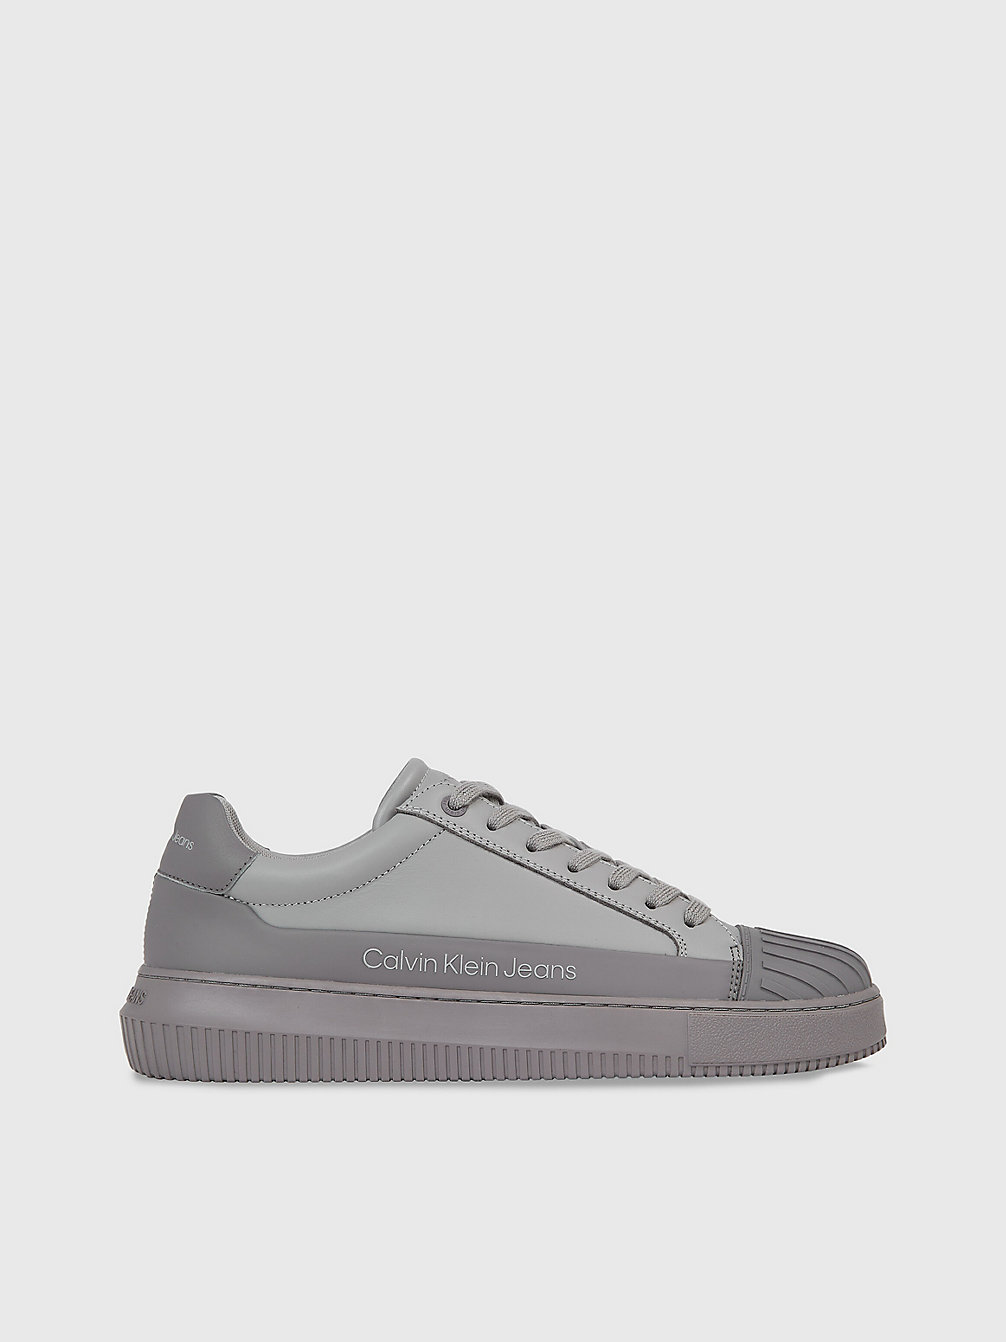 FORMAL GREY/STORMFRONT Leather Trainers undefined men Calvin Klein